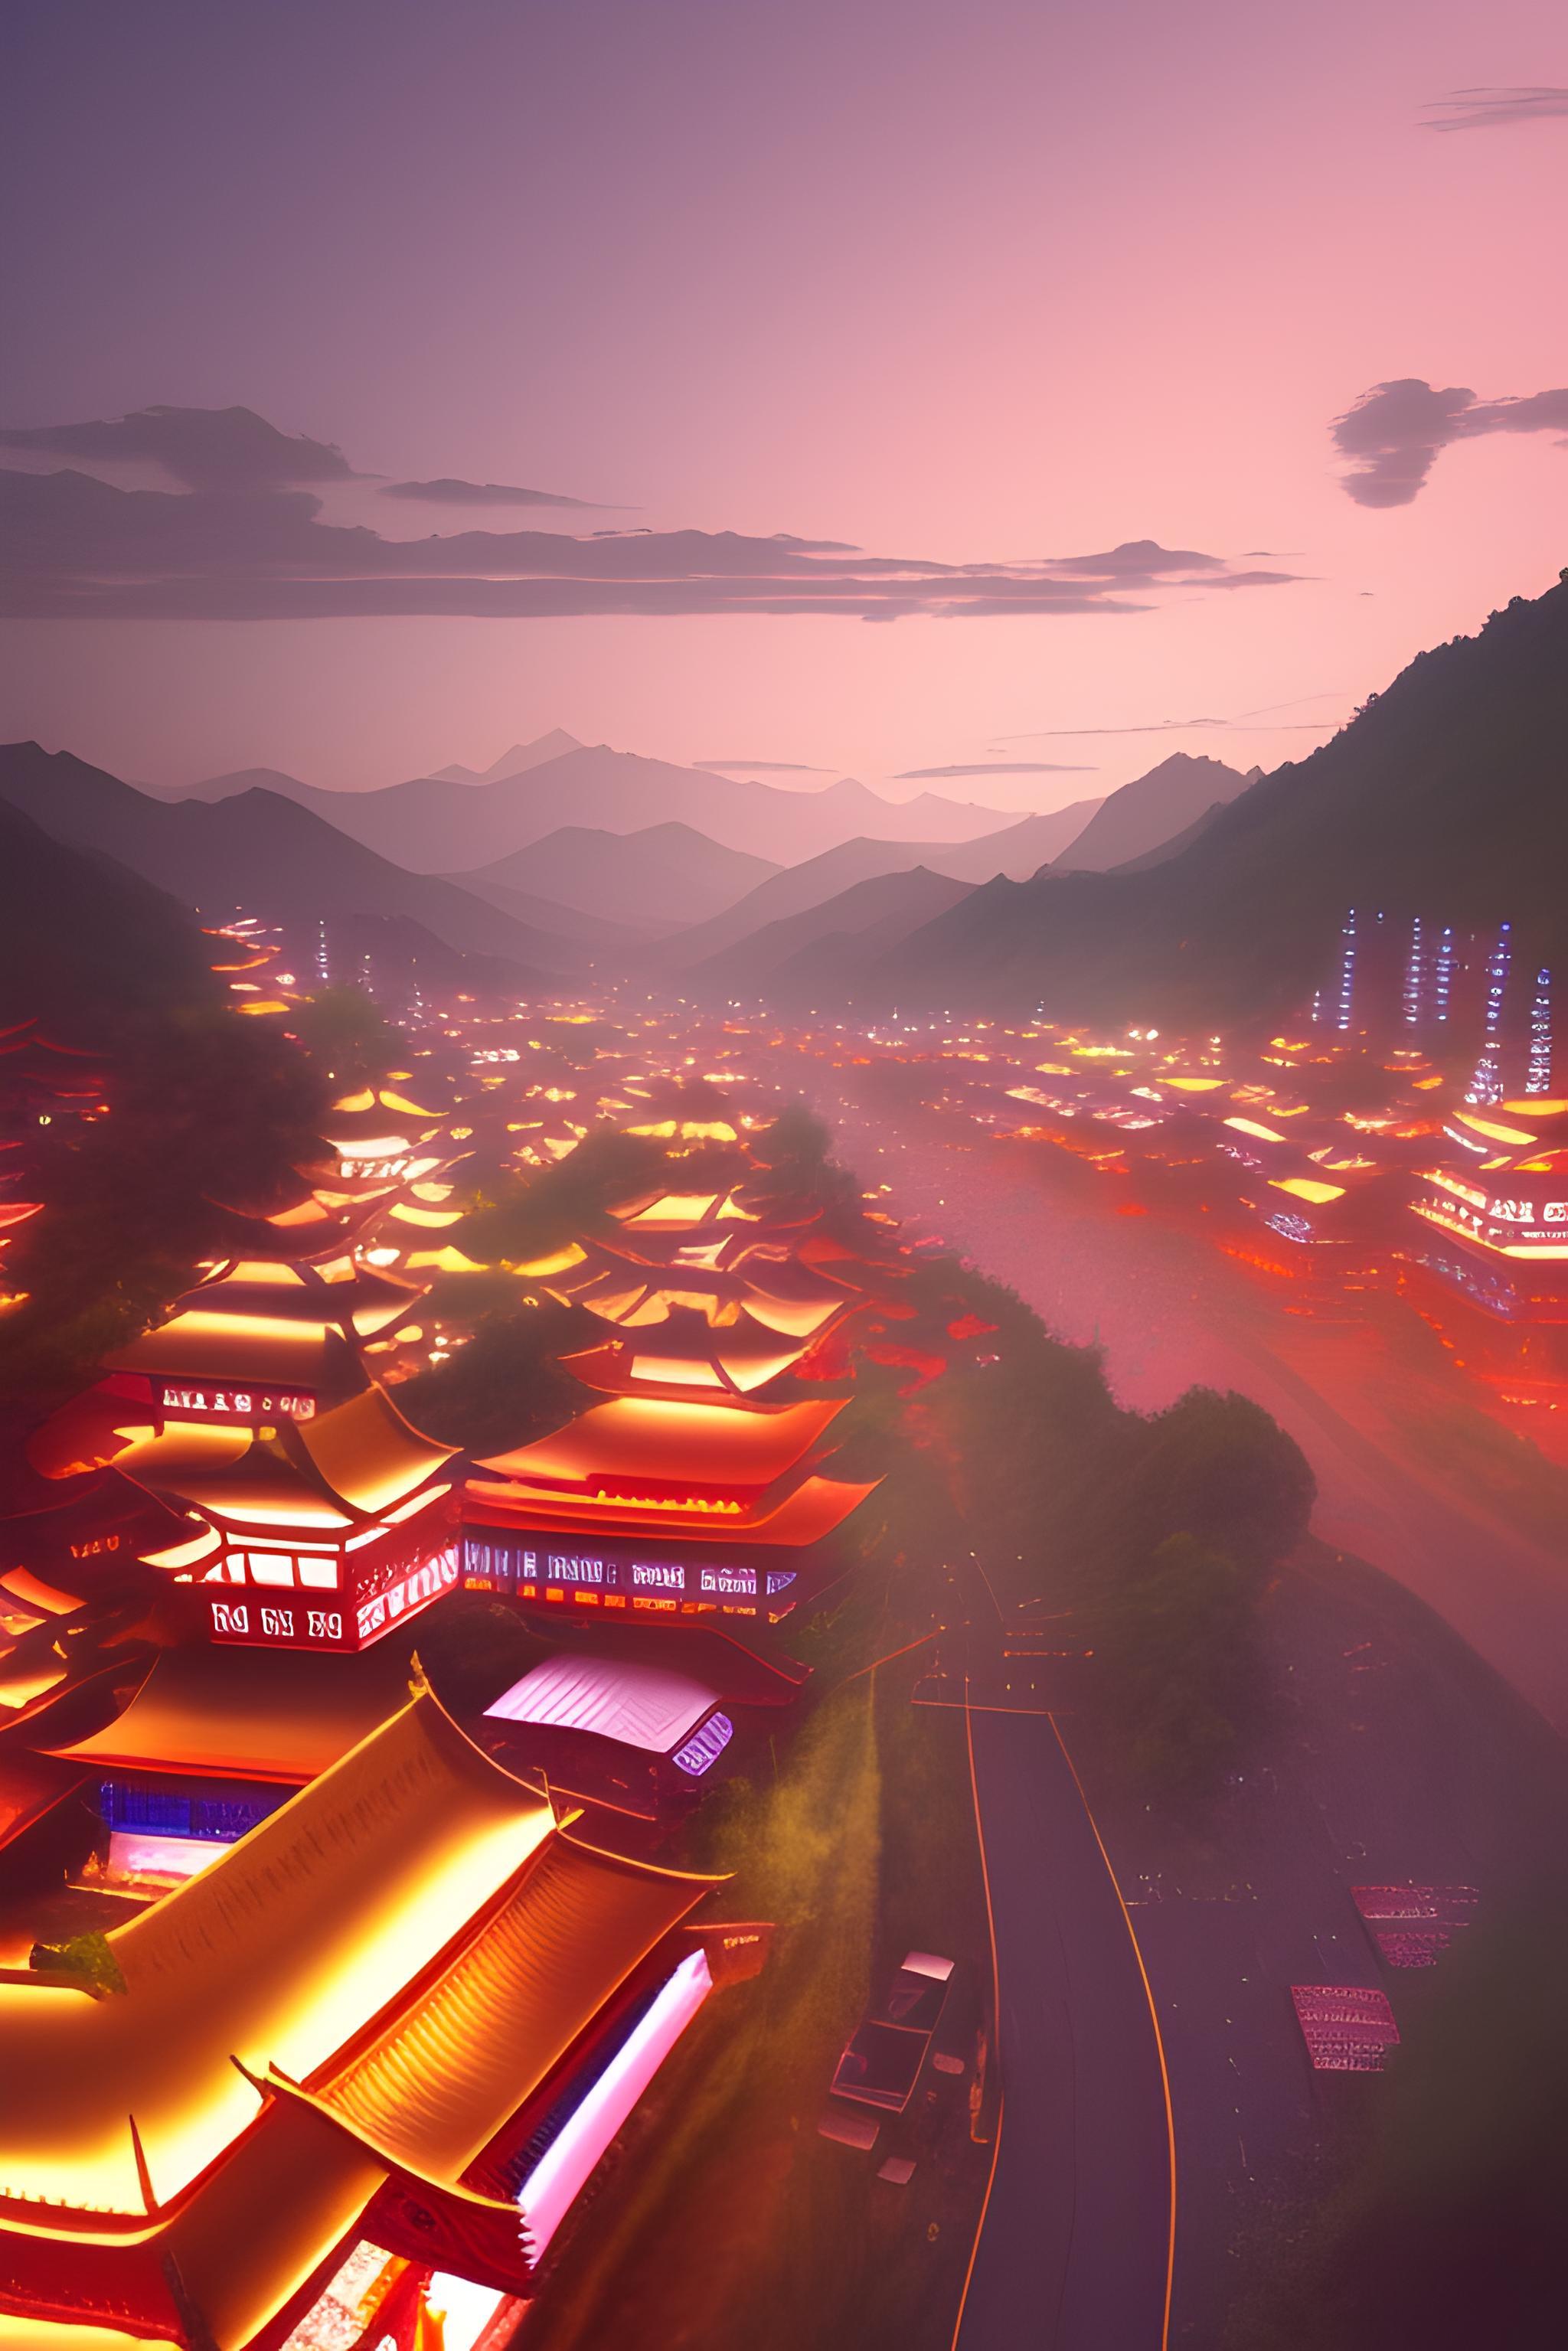 A High Resolution Stunning Photo Of Small Town In China At